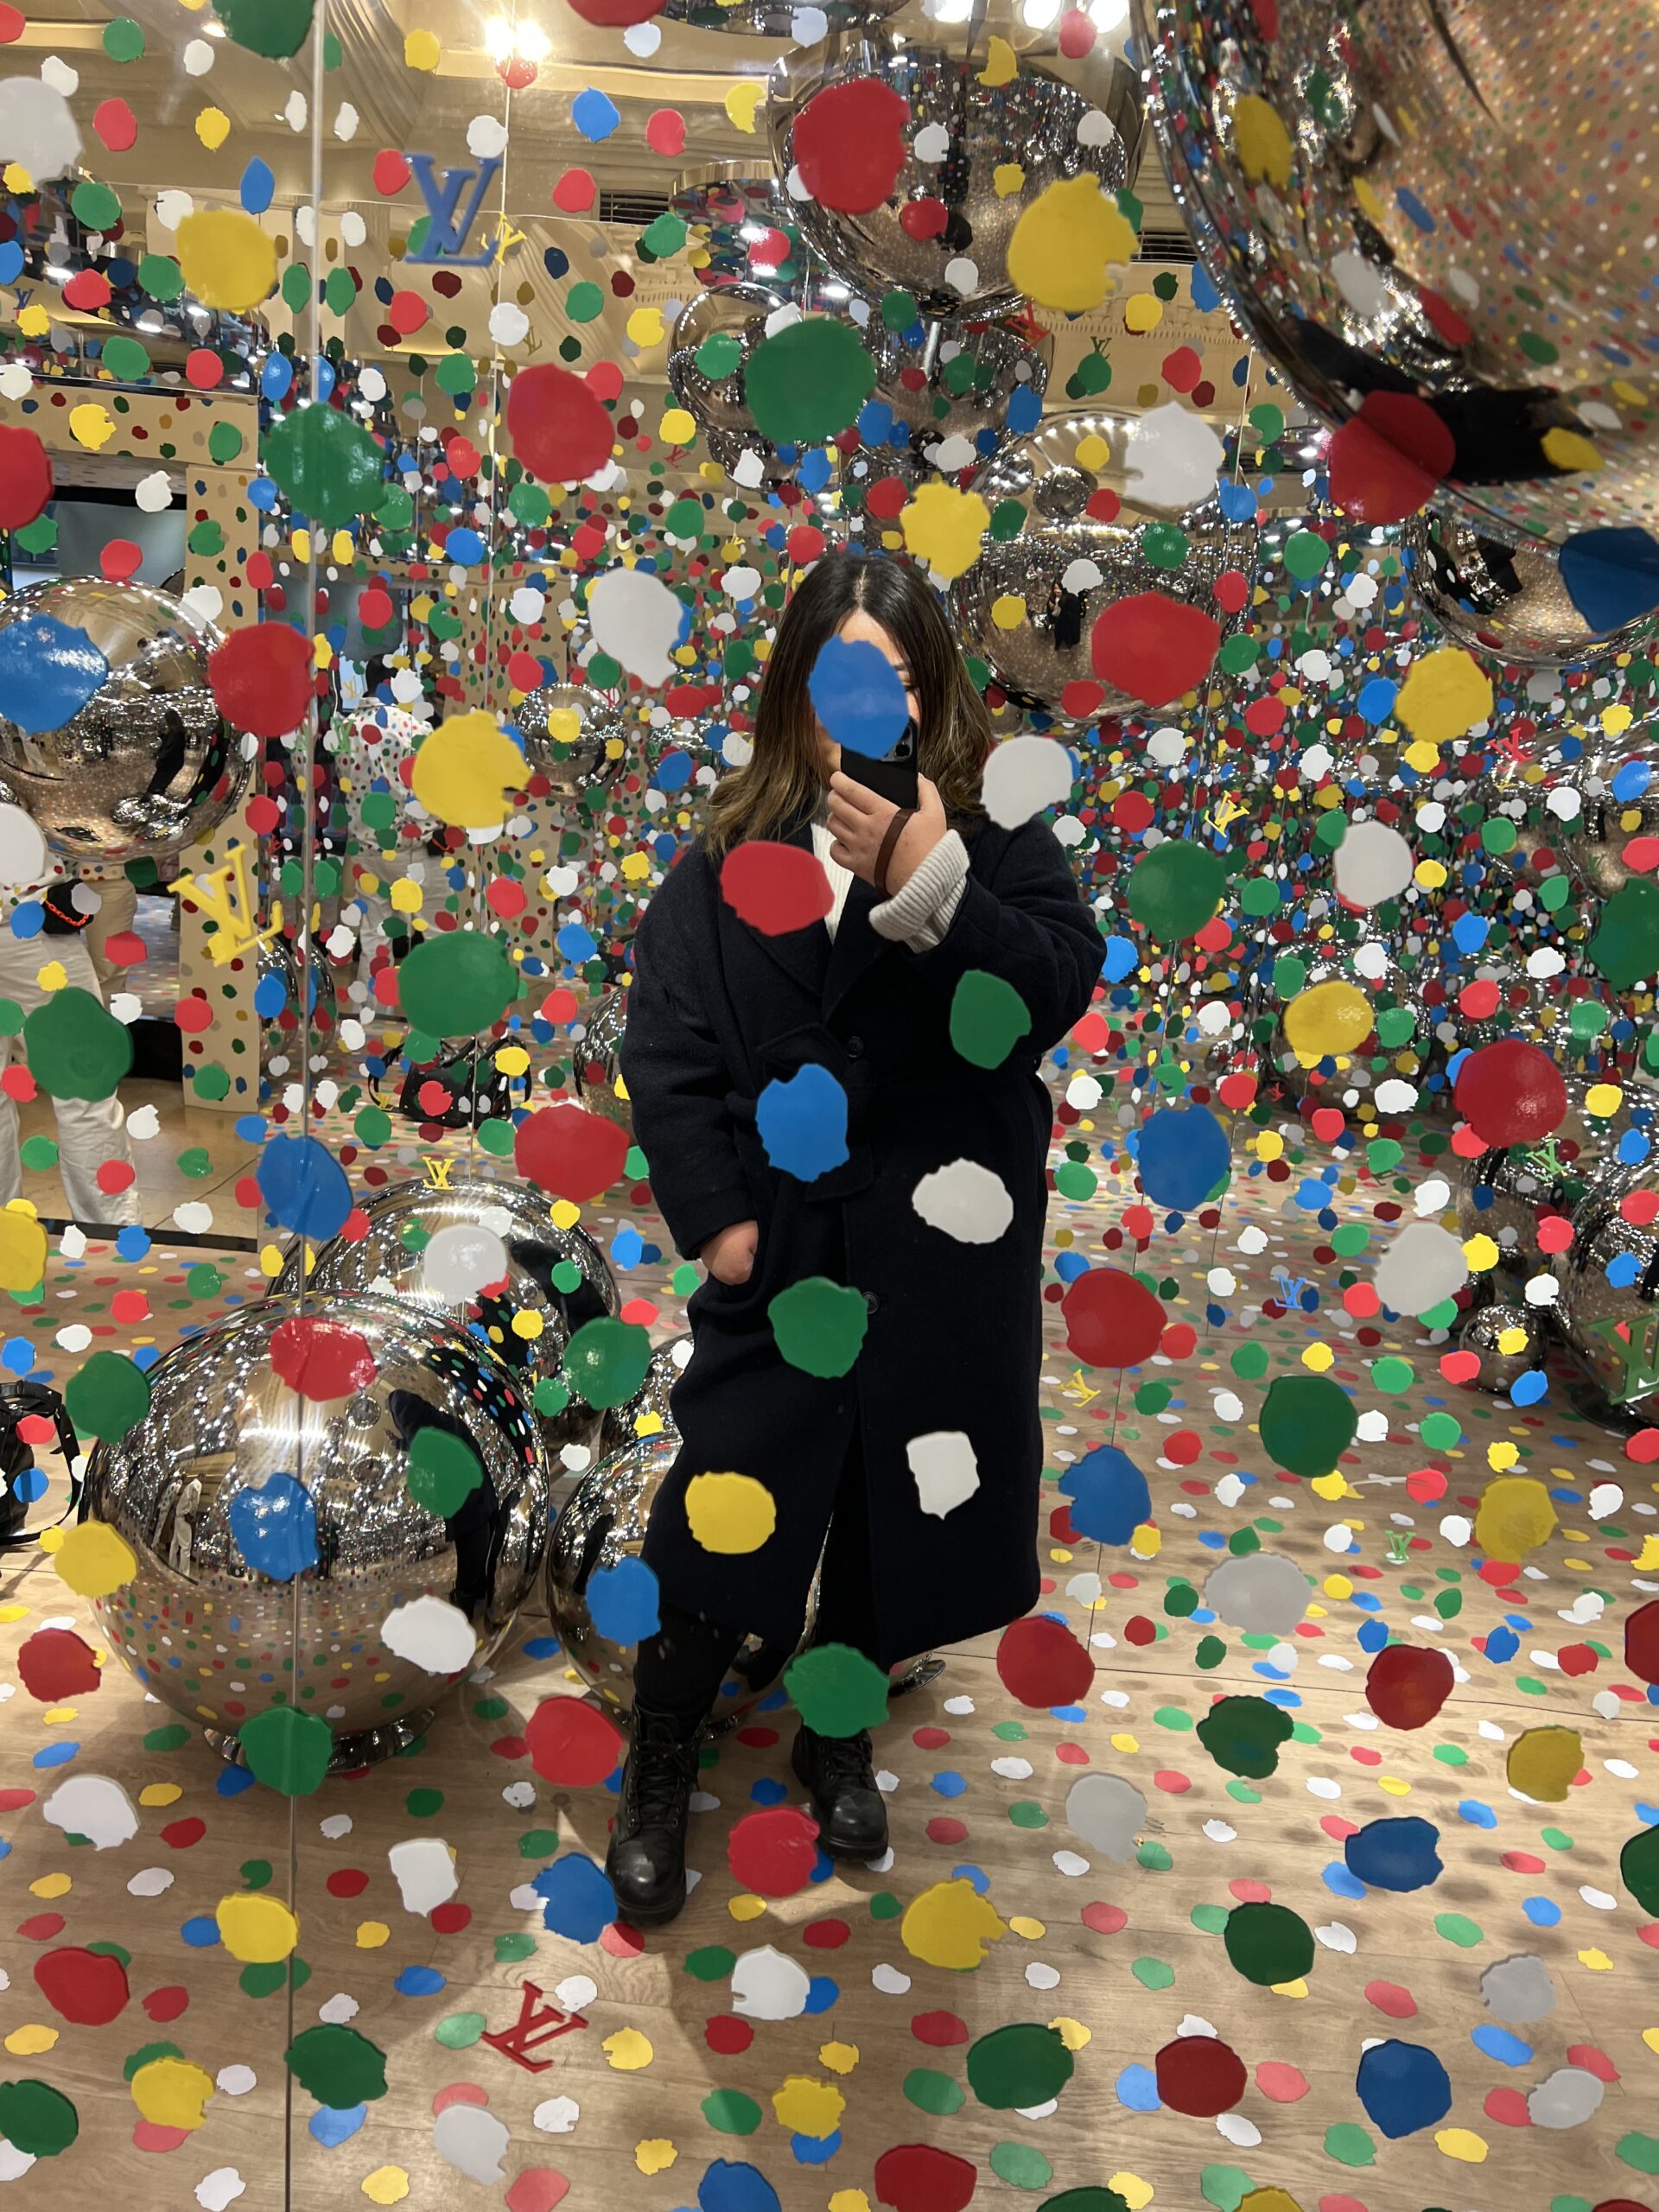 We just HAD to visit Harrods to see the Yayoi Kusama & @Louis